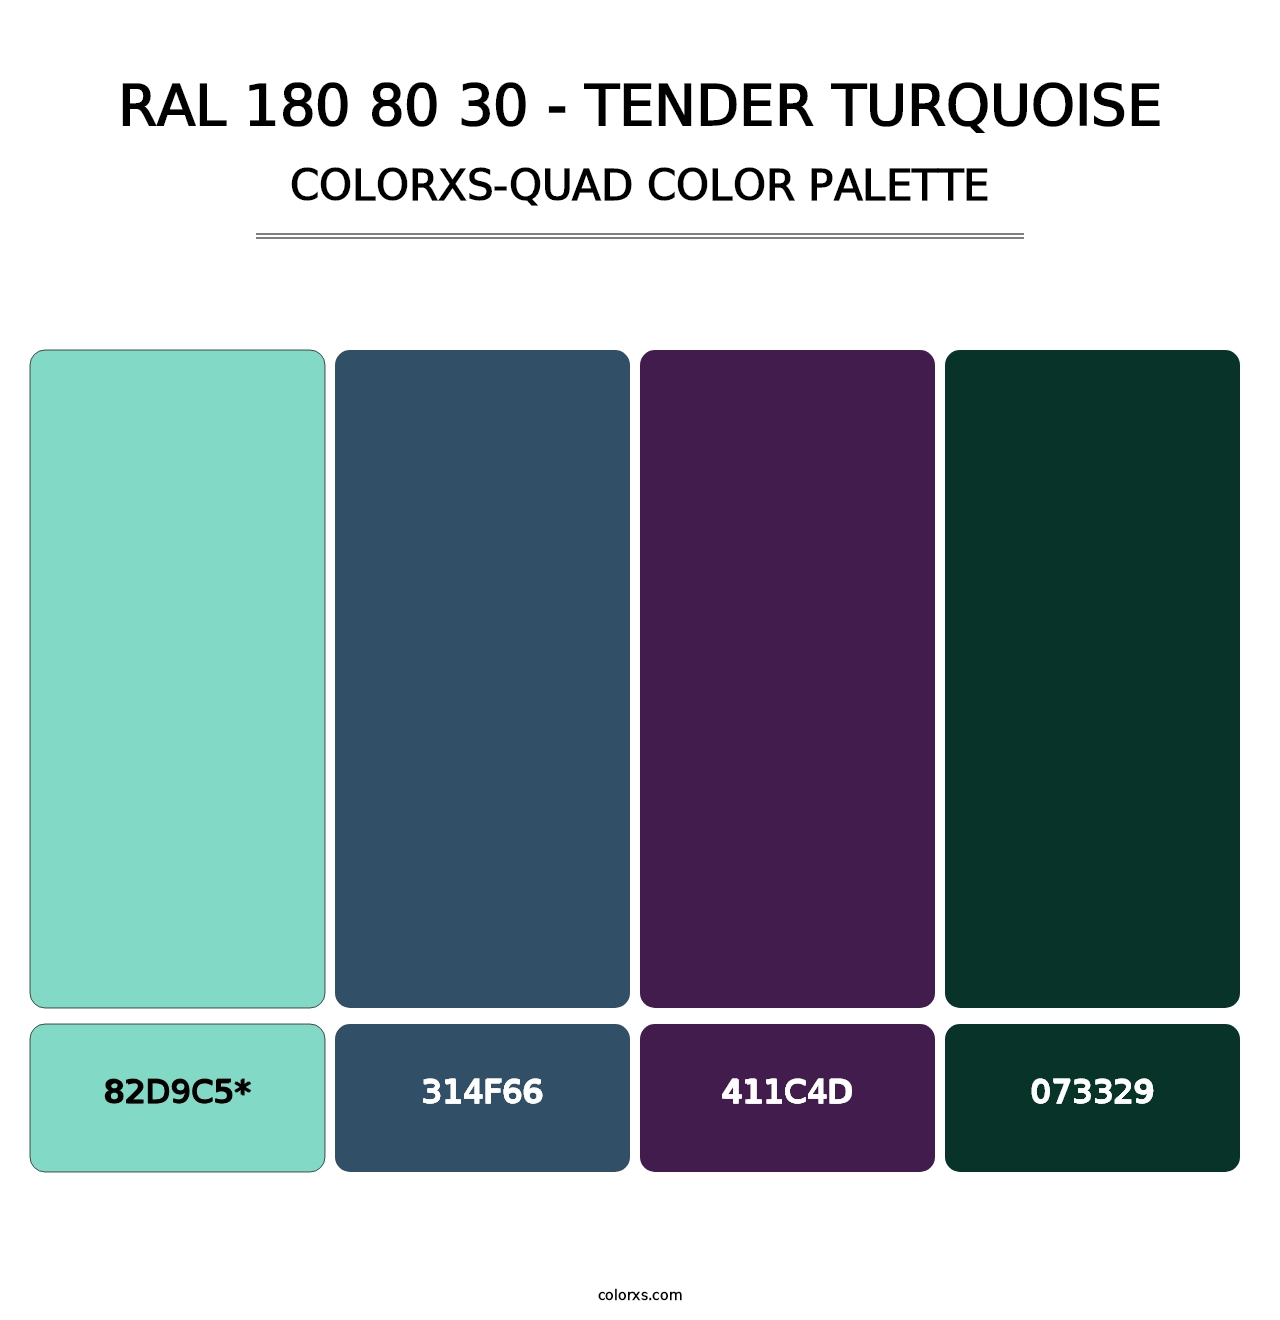 RAL 180 80 30 - Tender Turquoise - Colorxs Quad Palette